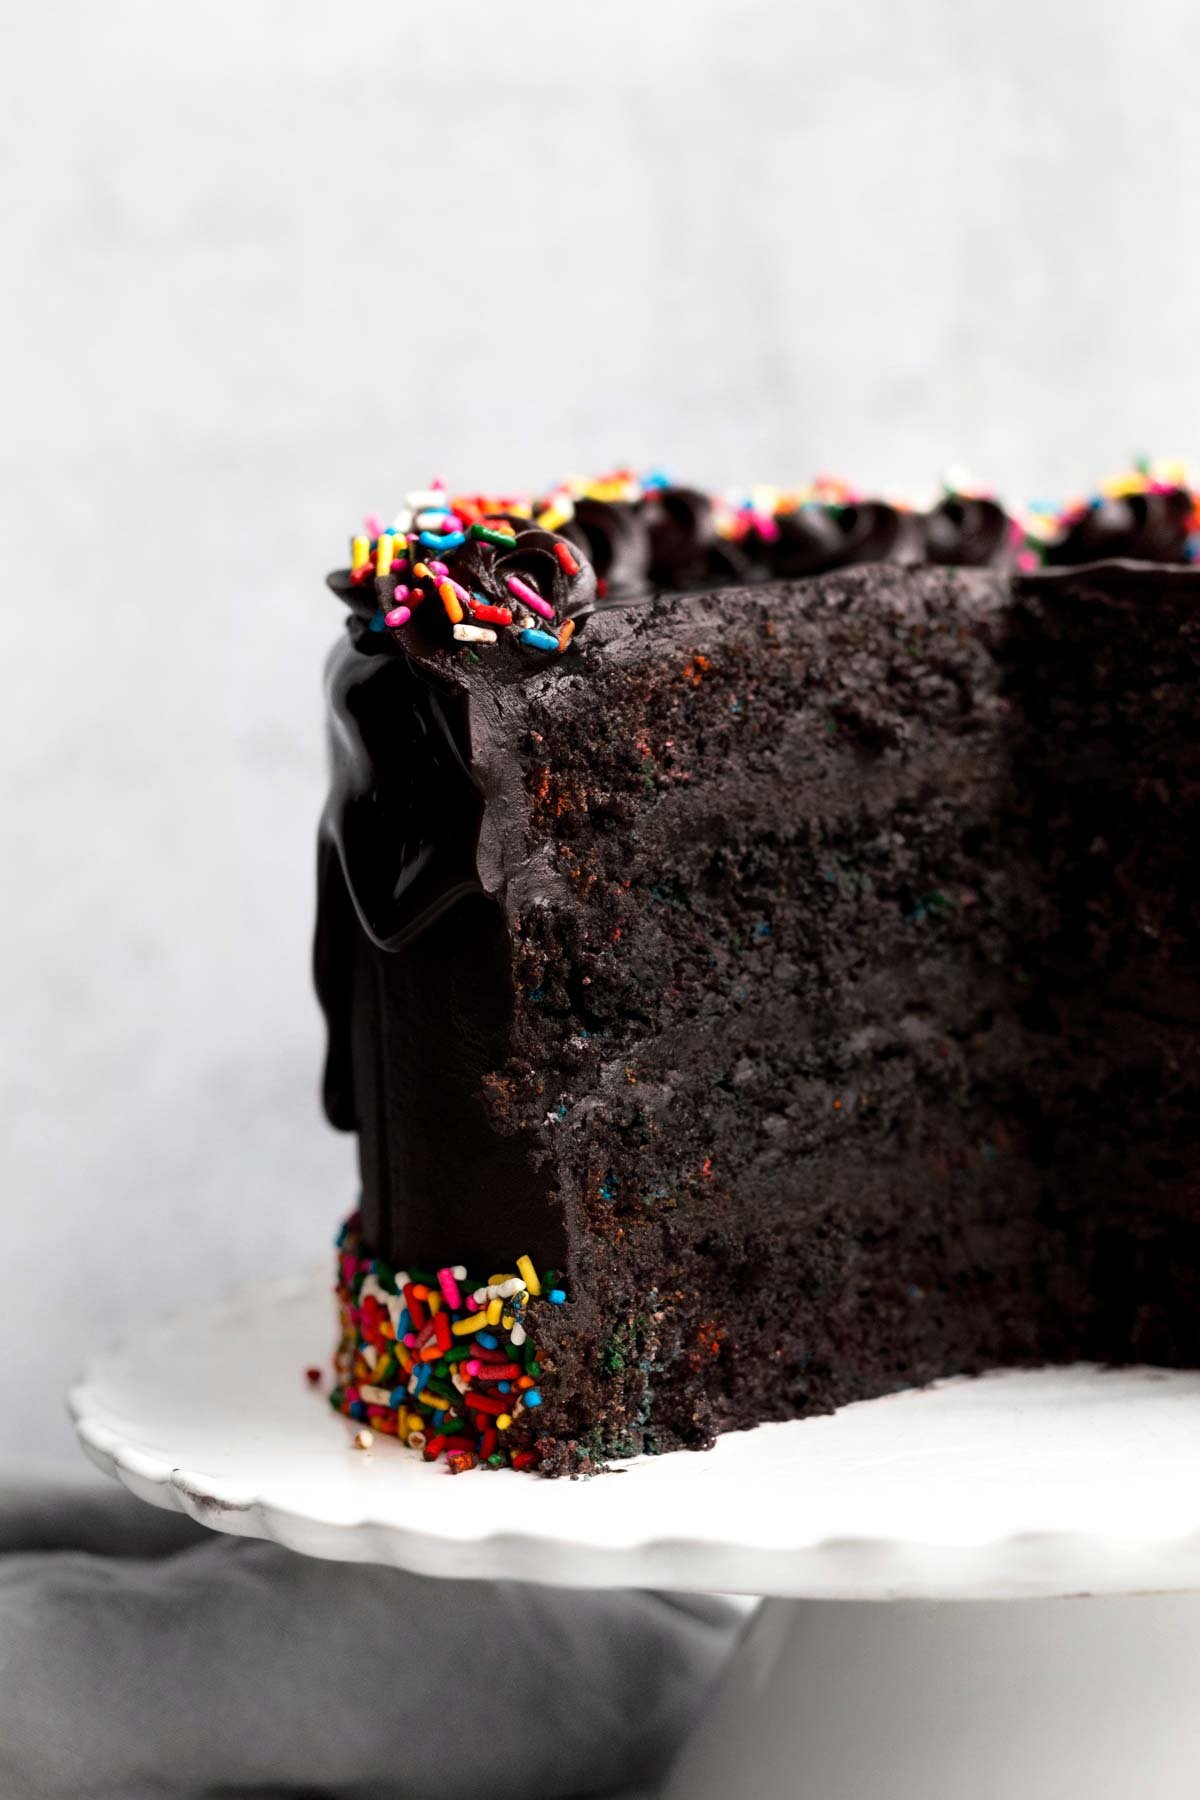 A look at the alternating layers of chocolate cake and frosting.